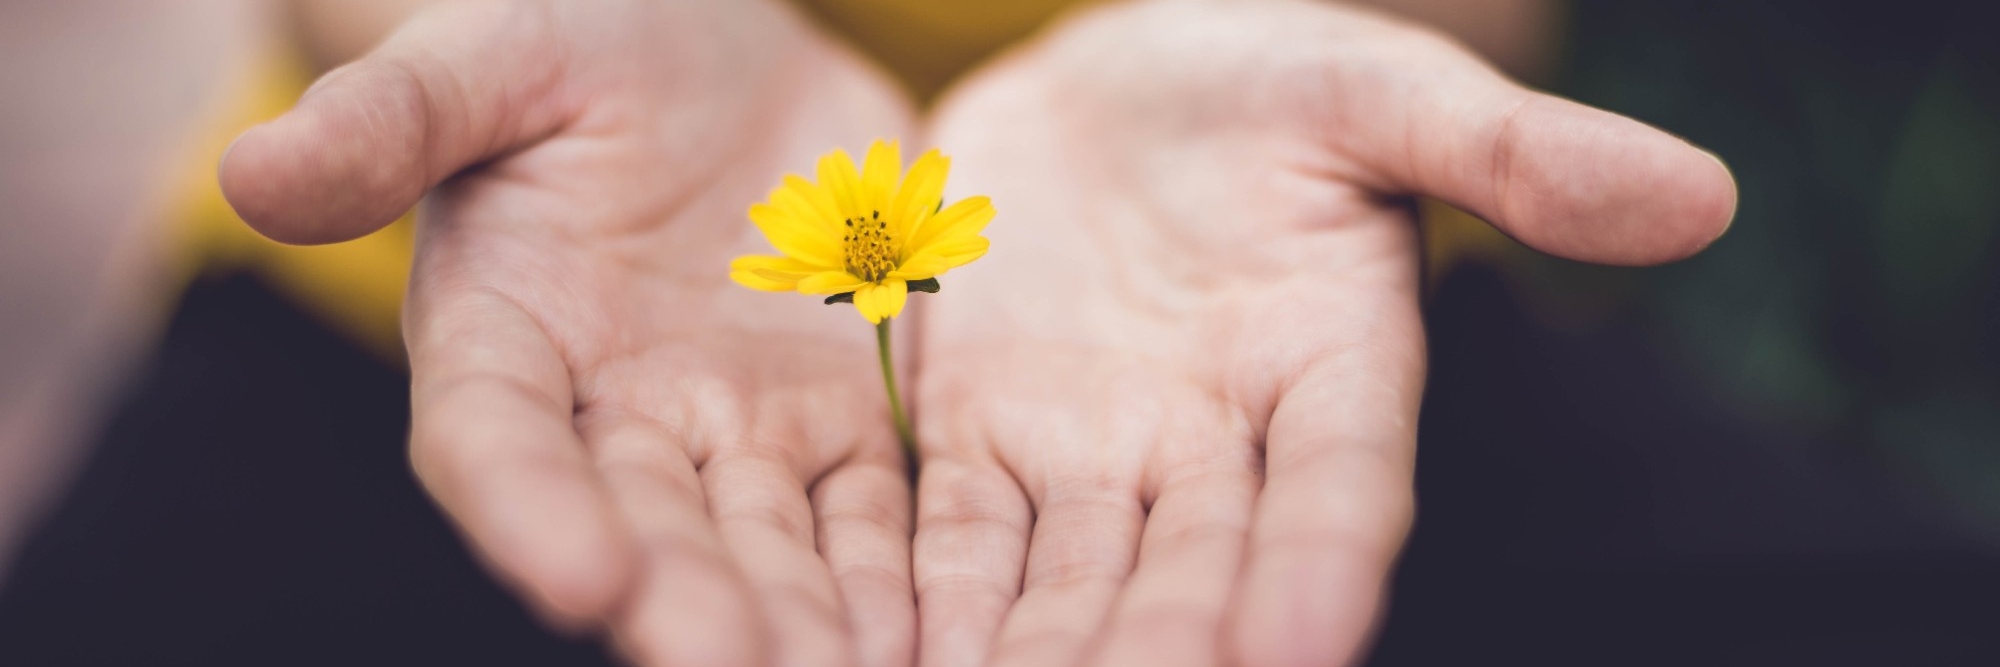 A pair of hands facing palms up are extended towards the camera with a yellow daffodil in the center where the two hands touch. The background is dark and blurred. On the right hand side in white text overlaying a red banner reads: PRACTICING WITH COMPASSION